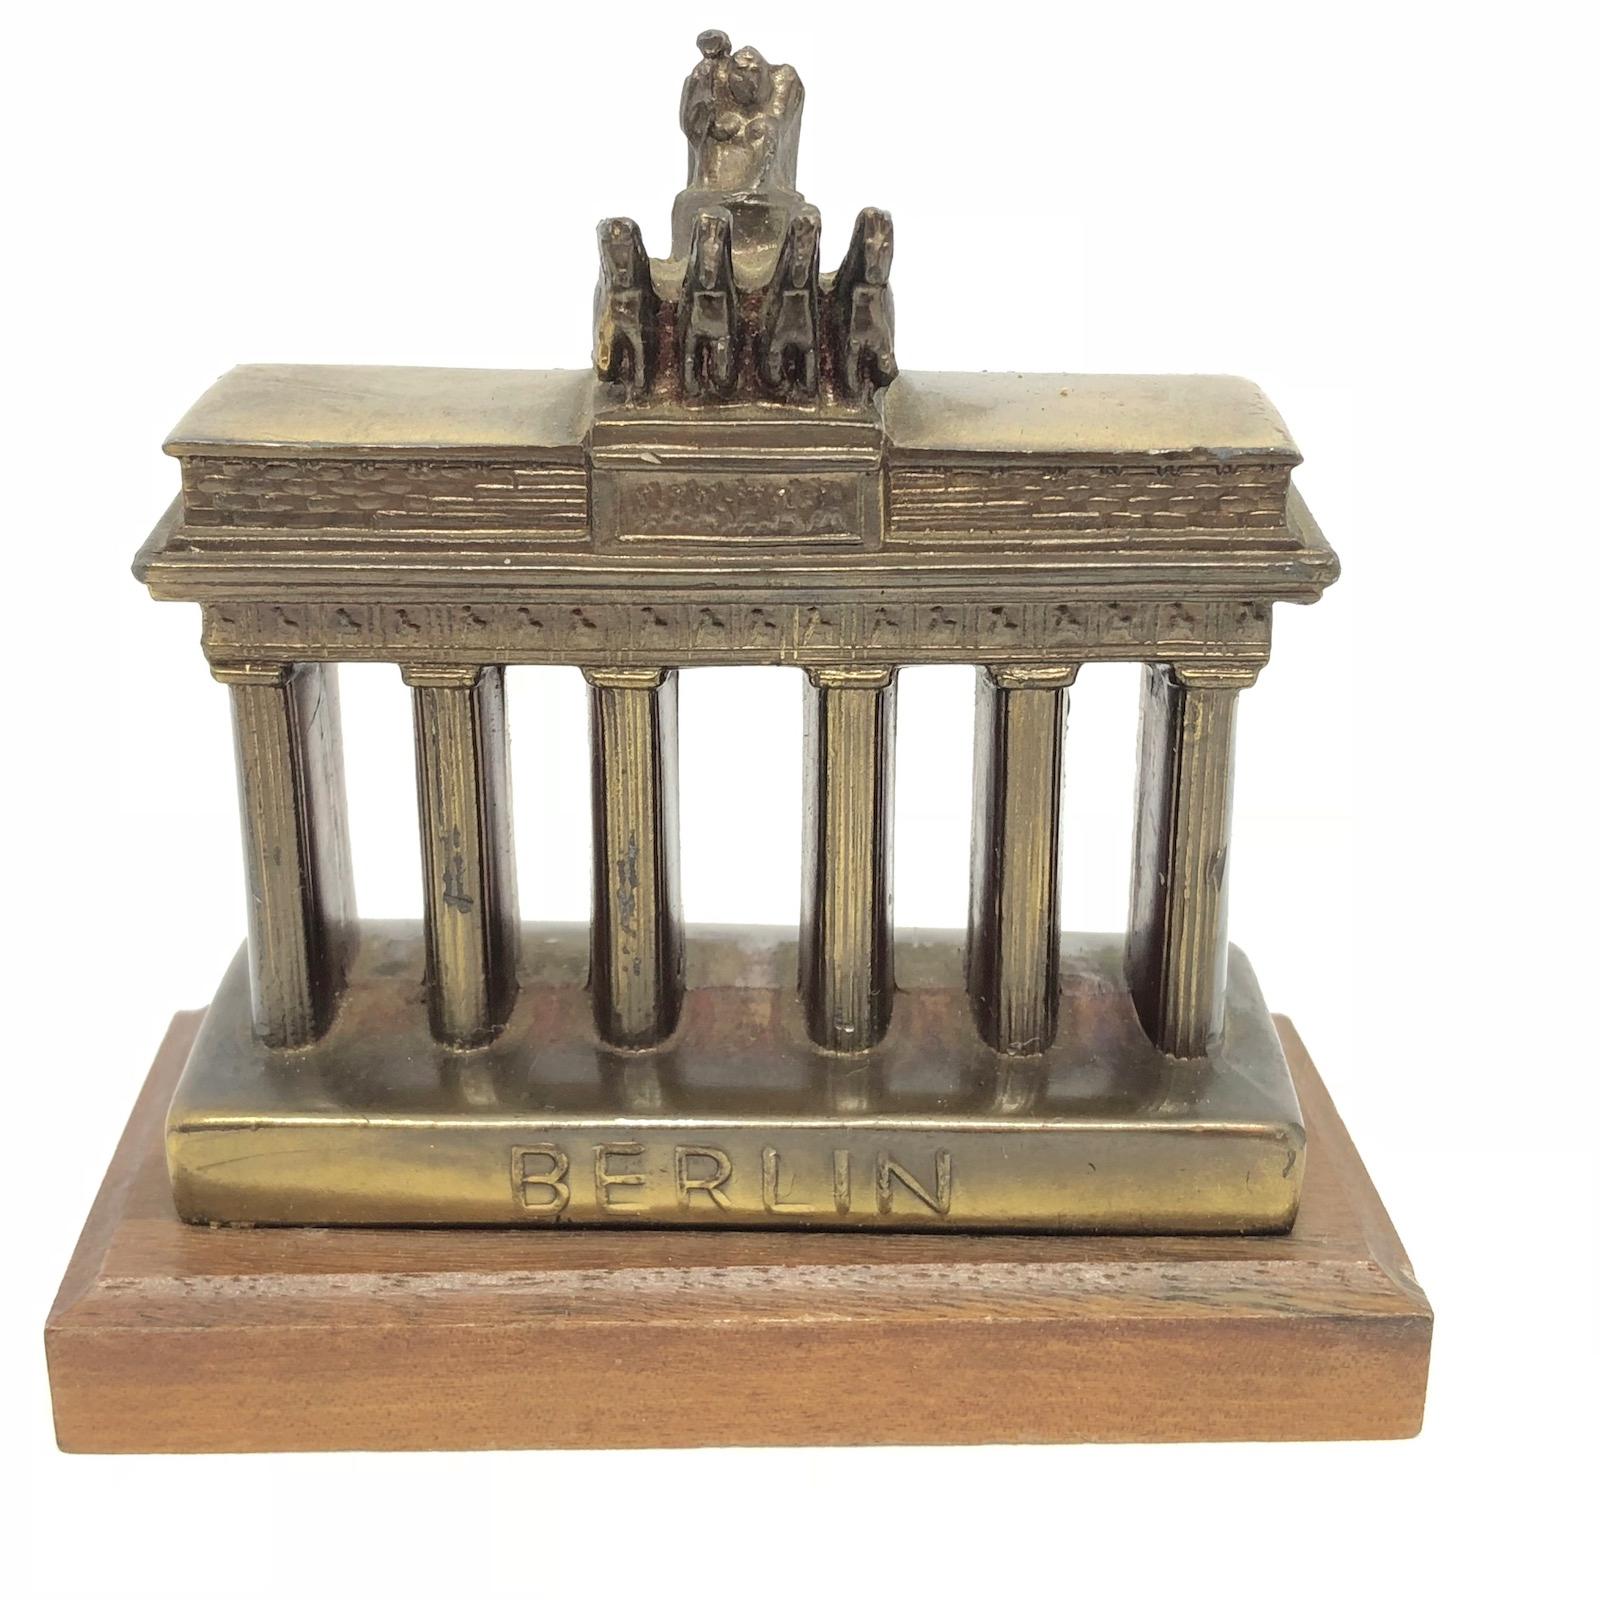 A decorative Brandenburg Gate souvenir building sculpture and a Berlin bear statue. Some wear with a nice patina, but this is old-age. Made of metal and a wooden base. These items were bought as a souvenir in Berlin and were made in the mid-20th